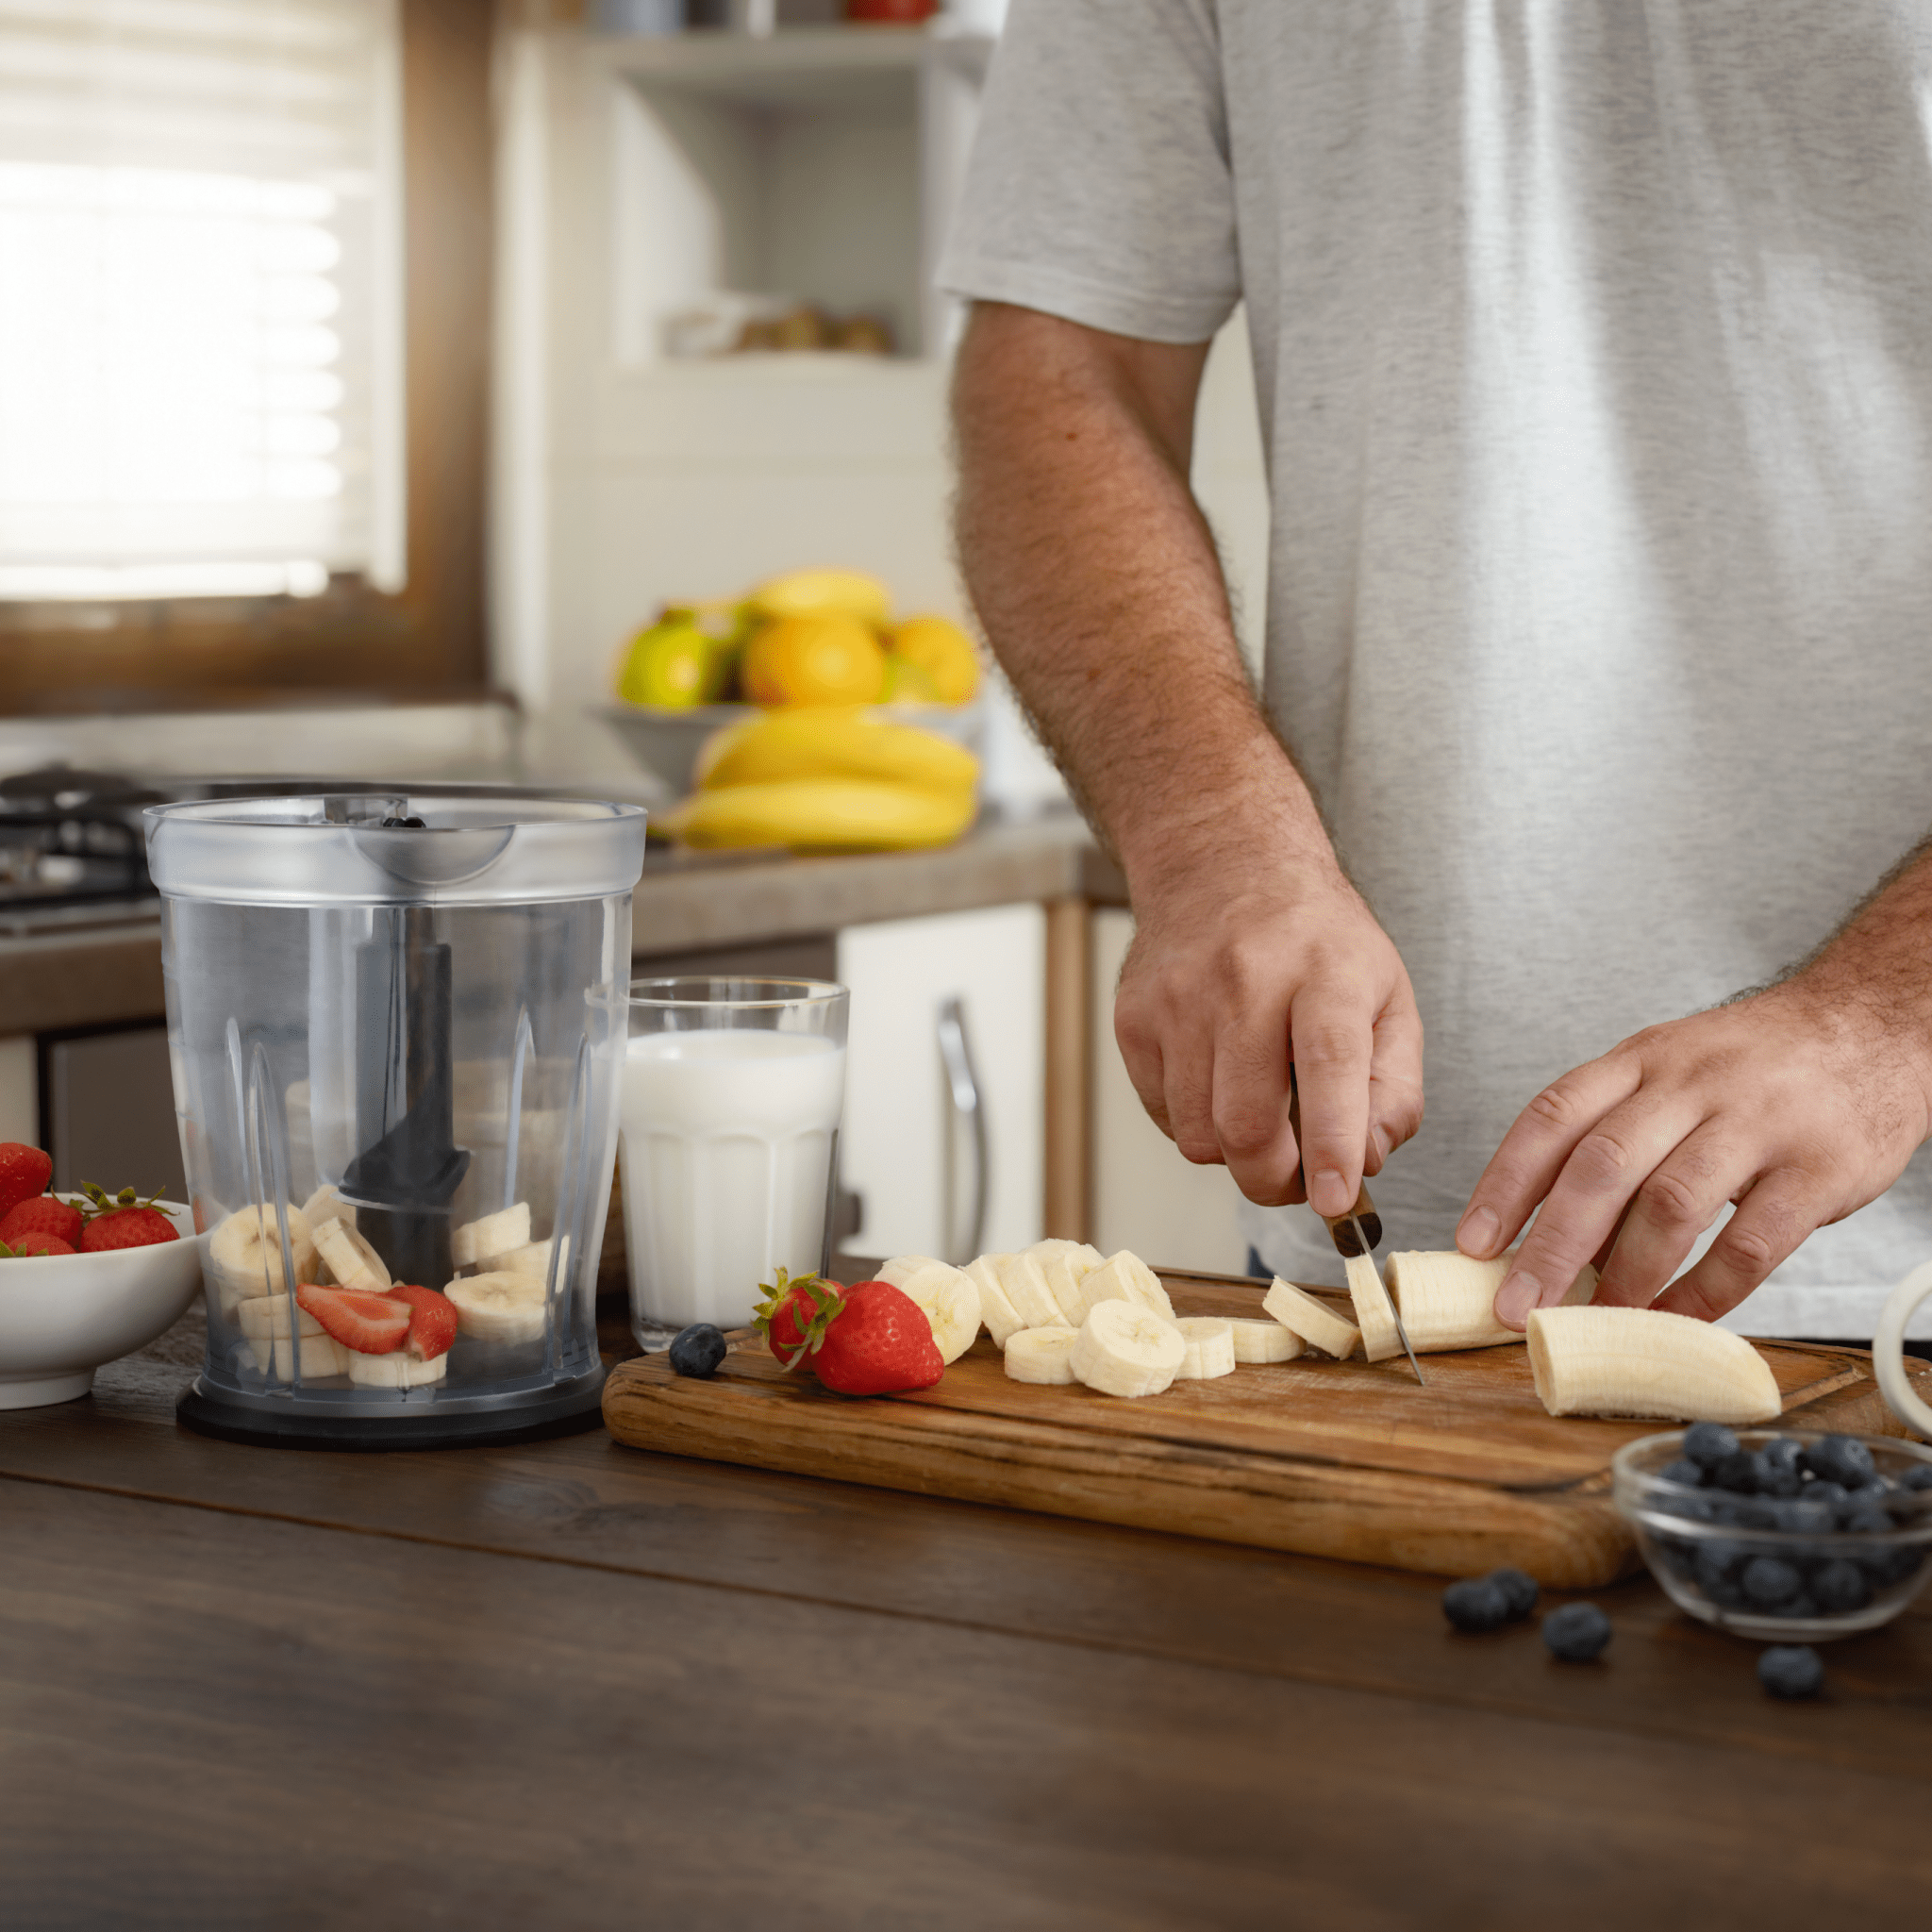 A man cutting fruit | Ultimate Nutrition